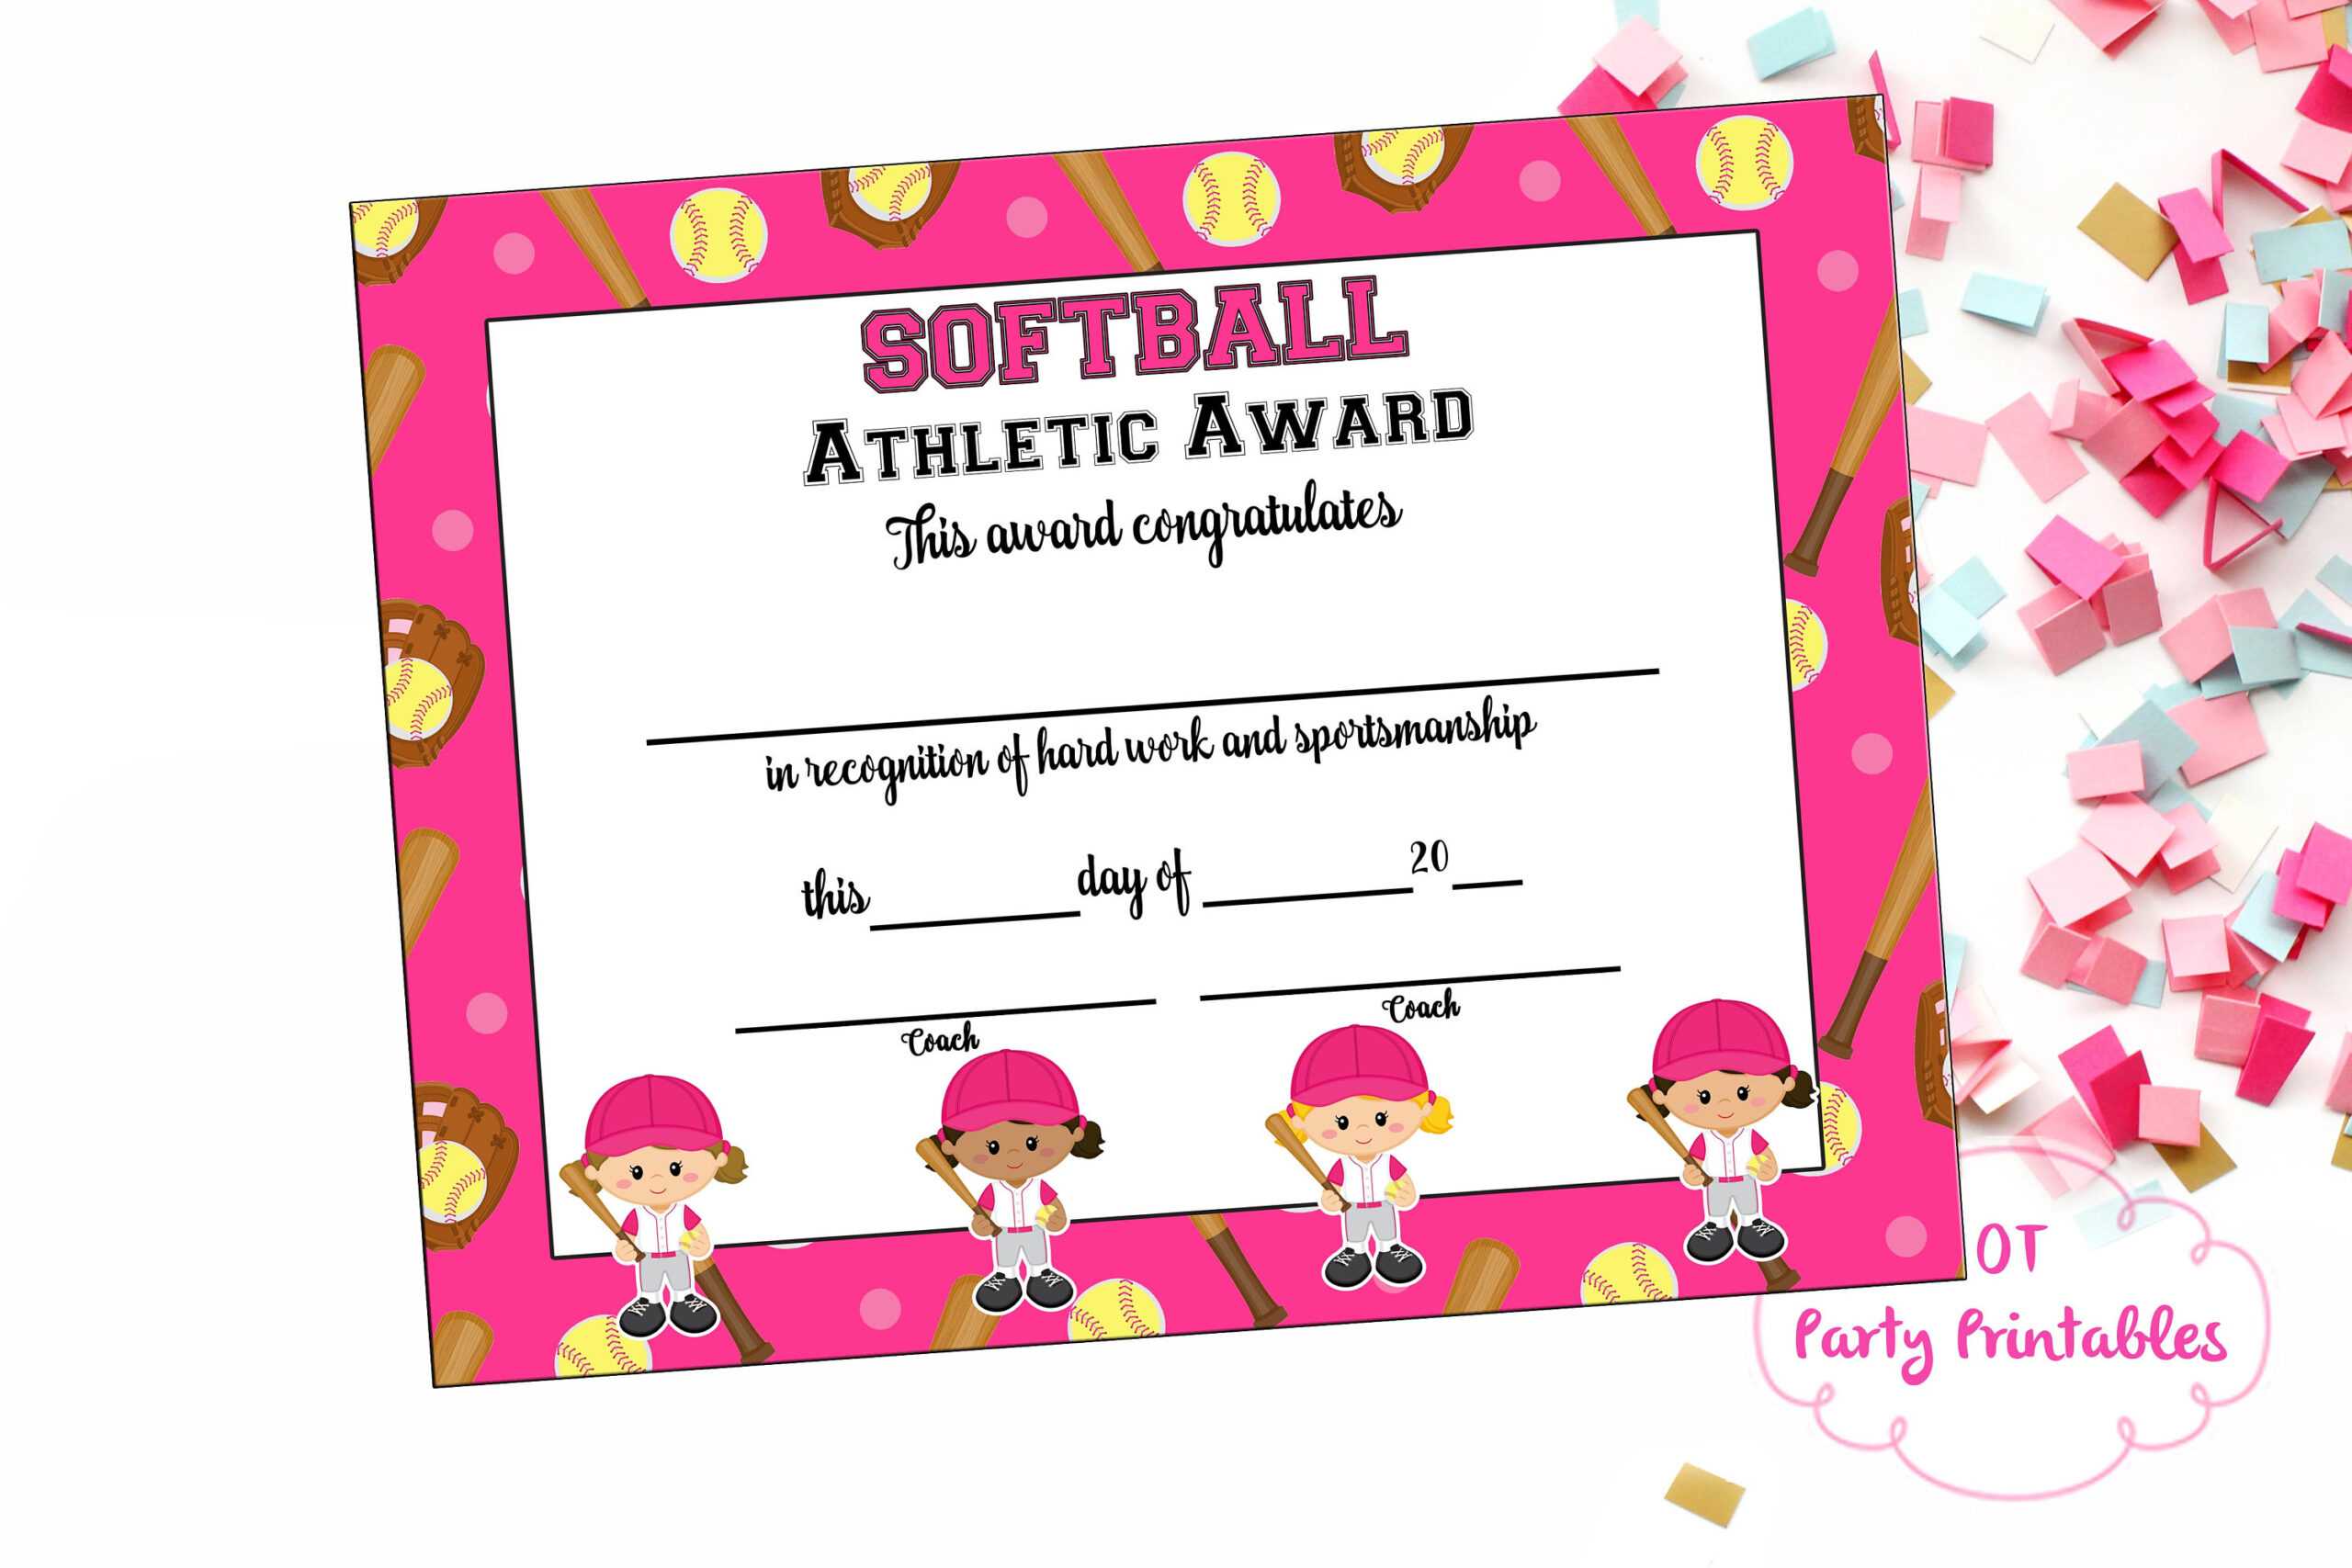 Softball Certificate Of Achievement – Softball Award – Print At Home –  Softball Mvp – Softball Certificate Of Completion – Sports Award Pertaining To Softball Certificate Templates